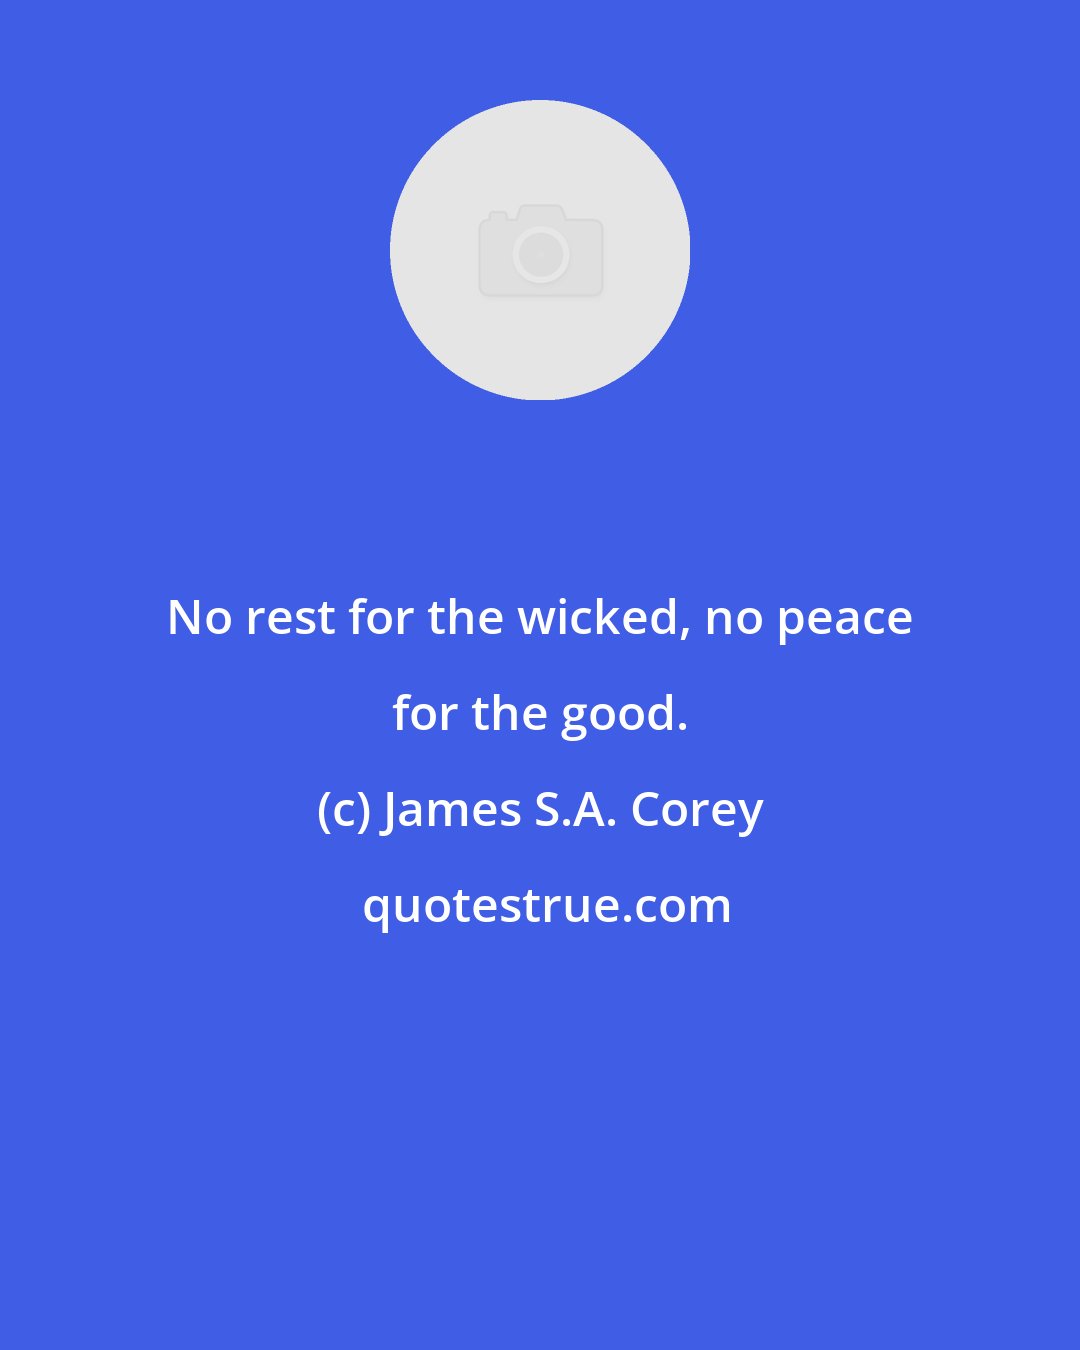 James S.A. Corey: No rest for the wicked, no peace for the good.